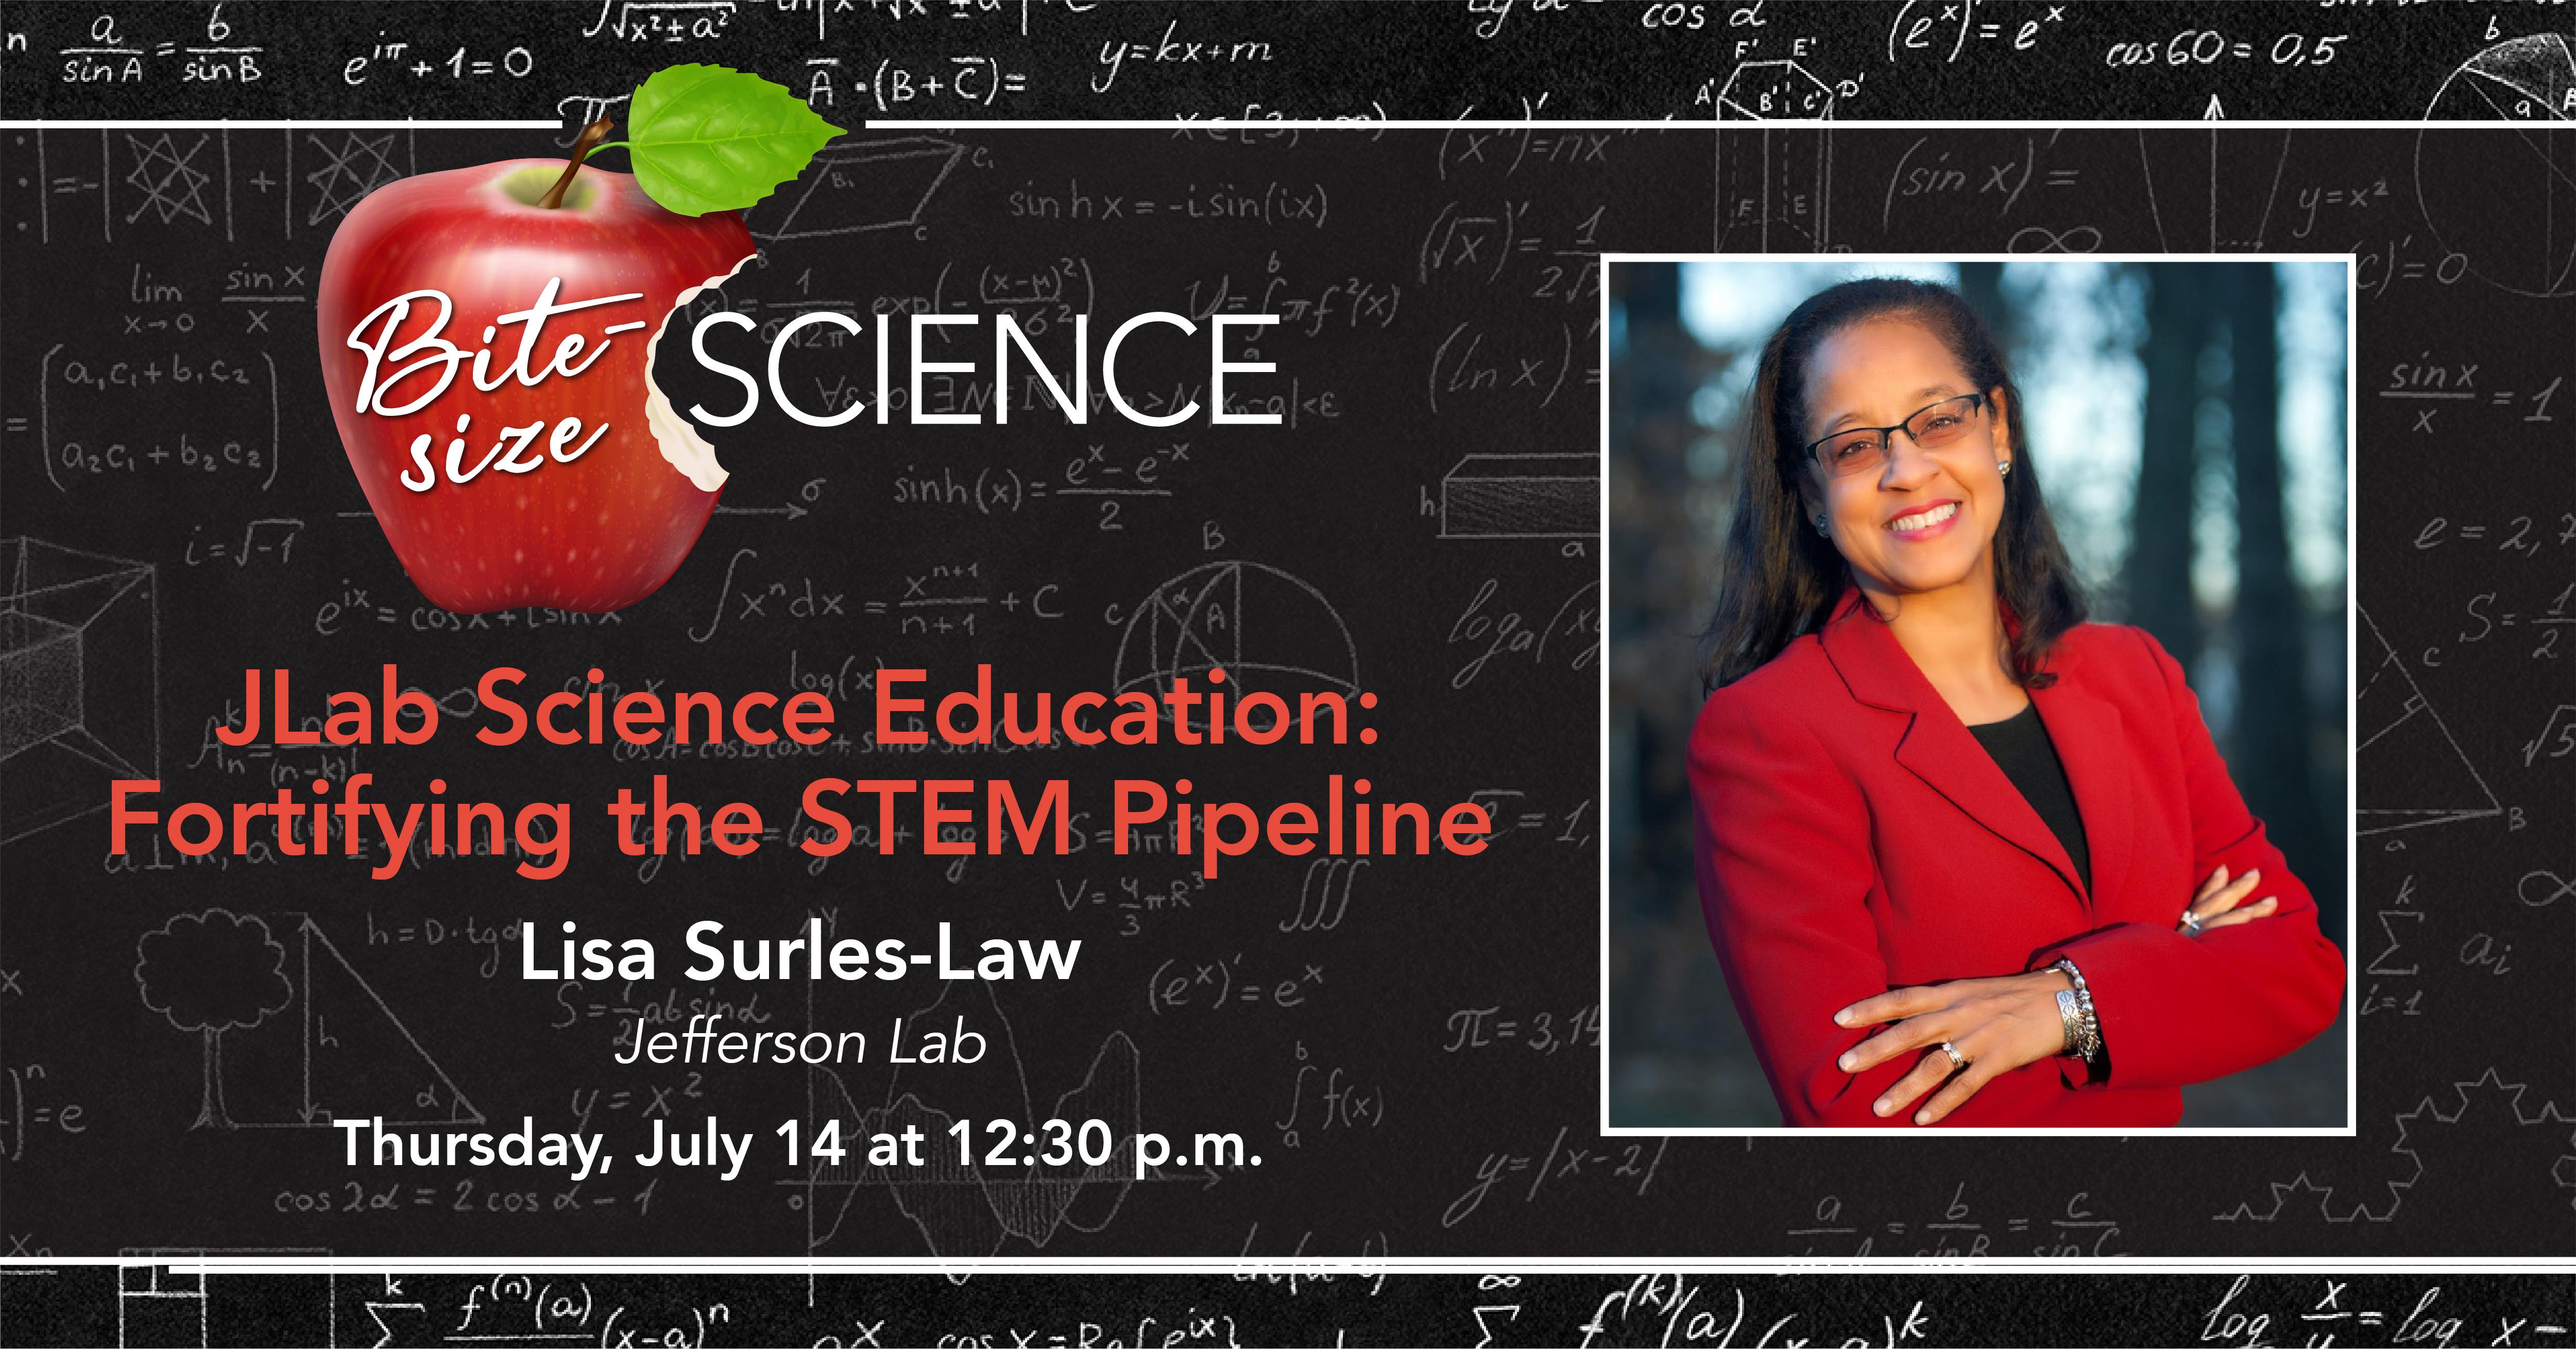 Bite-Size Science - JLab Science Education: Fortifying the STEM pipe with Lisa Surles-Lawline